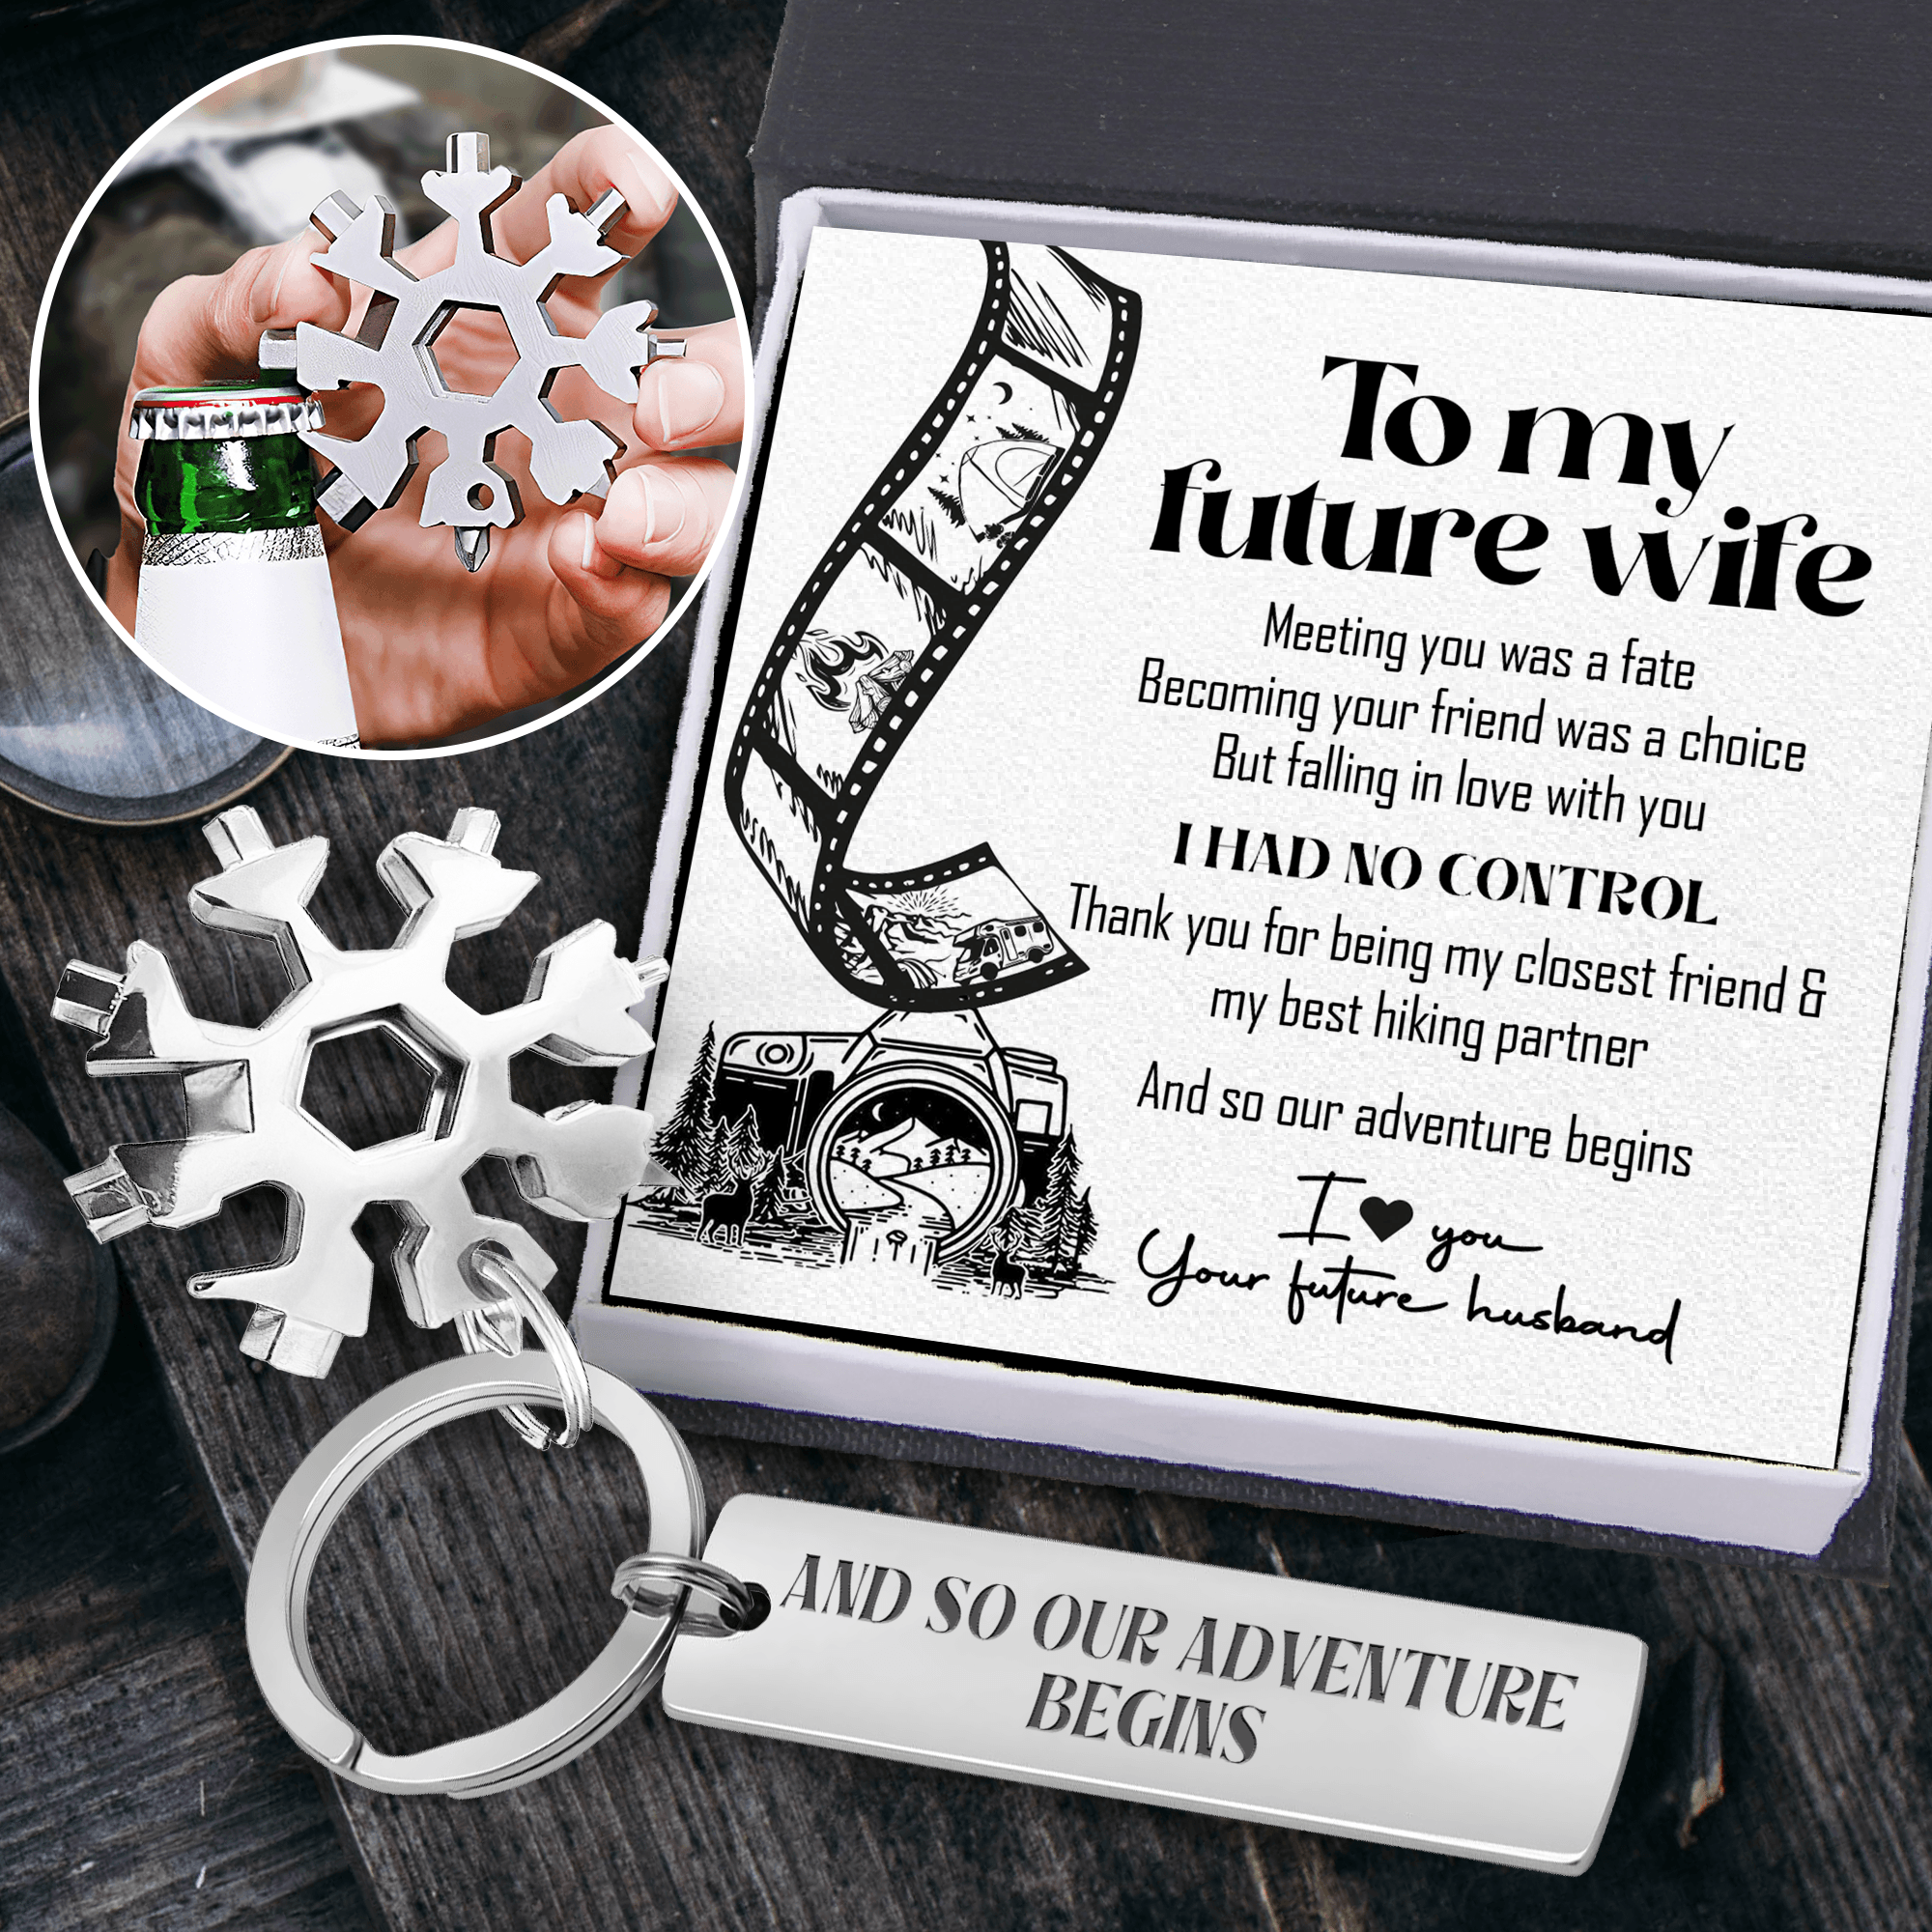 Multitool Keychain - Hiking - To My Future Wife - Thank You For Being My Best Hiking Partner - Augktb25001 - Gifts Holder